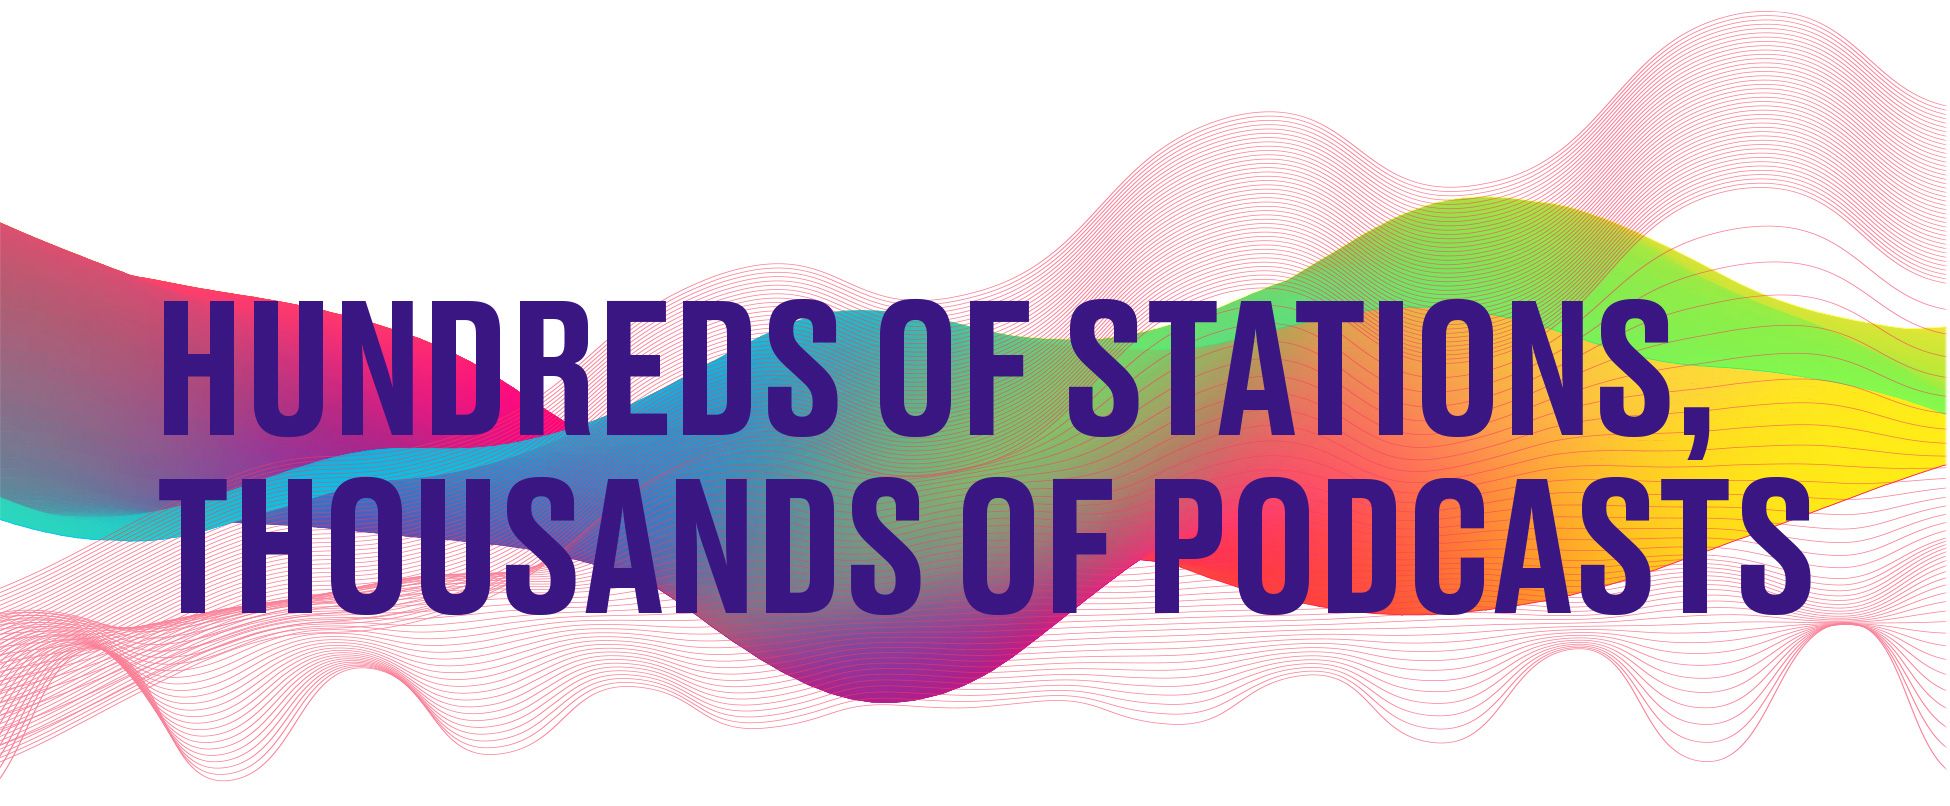 Hundreds of stations, thousands of podcasts